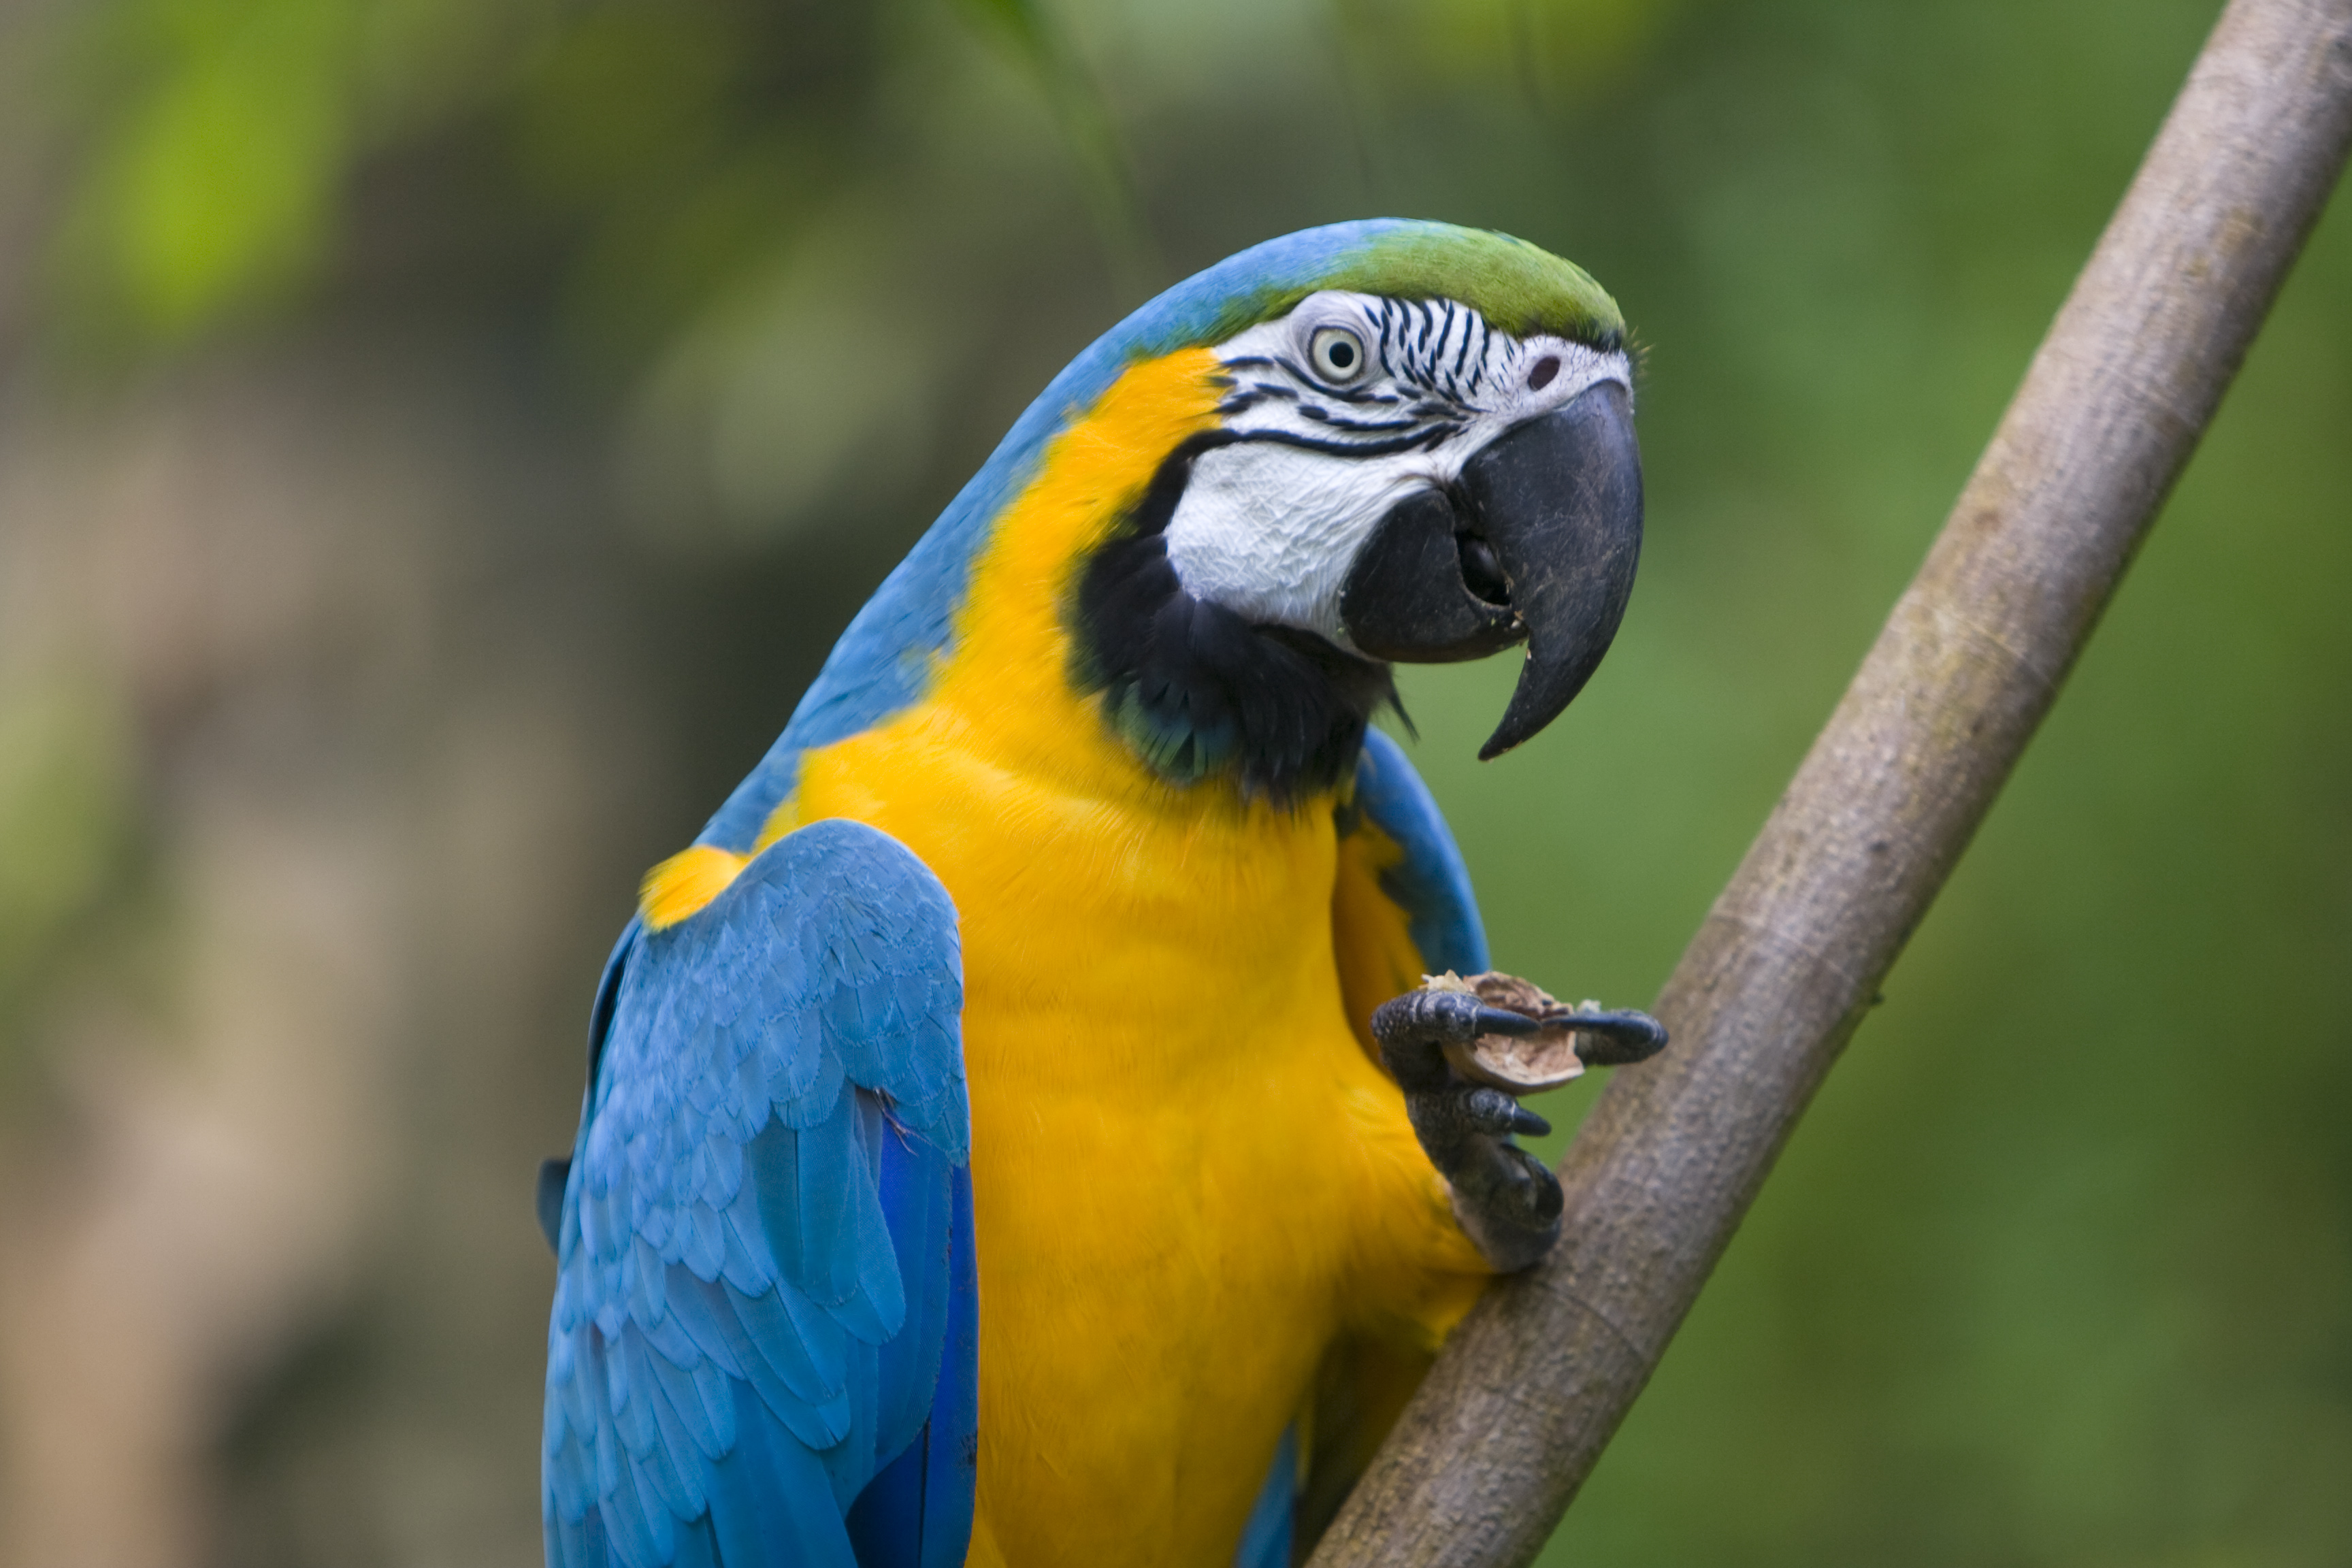 HQ Macaw Wallpapers | File 1965.17Kb